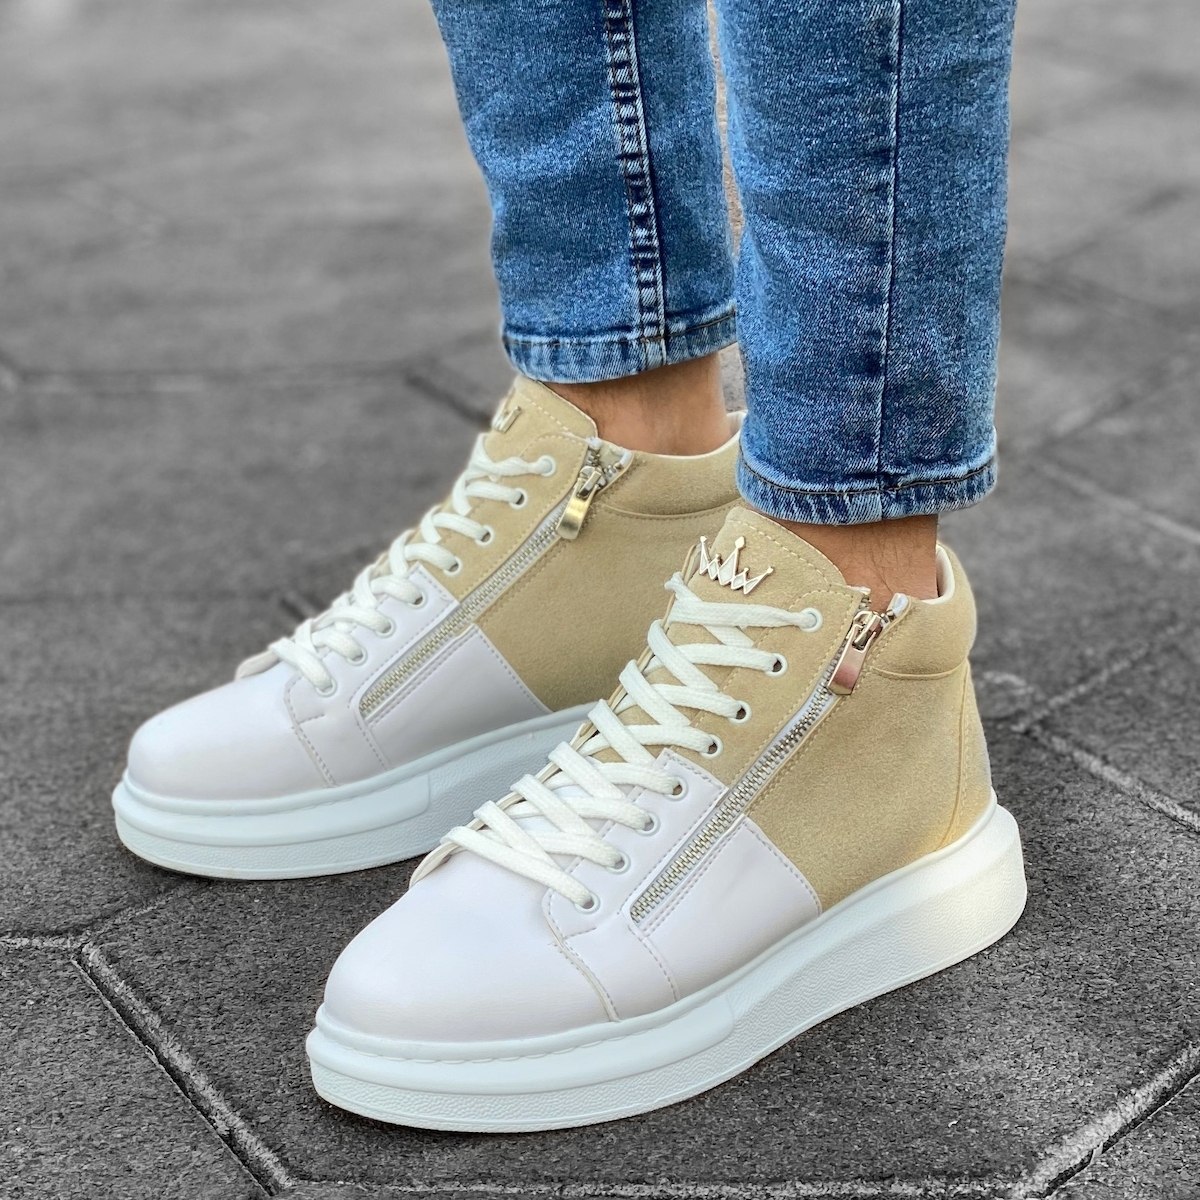 Hype Sole Zipped Style High Top Sneakers in Cream-White | Martin Valen